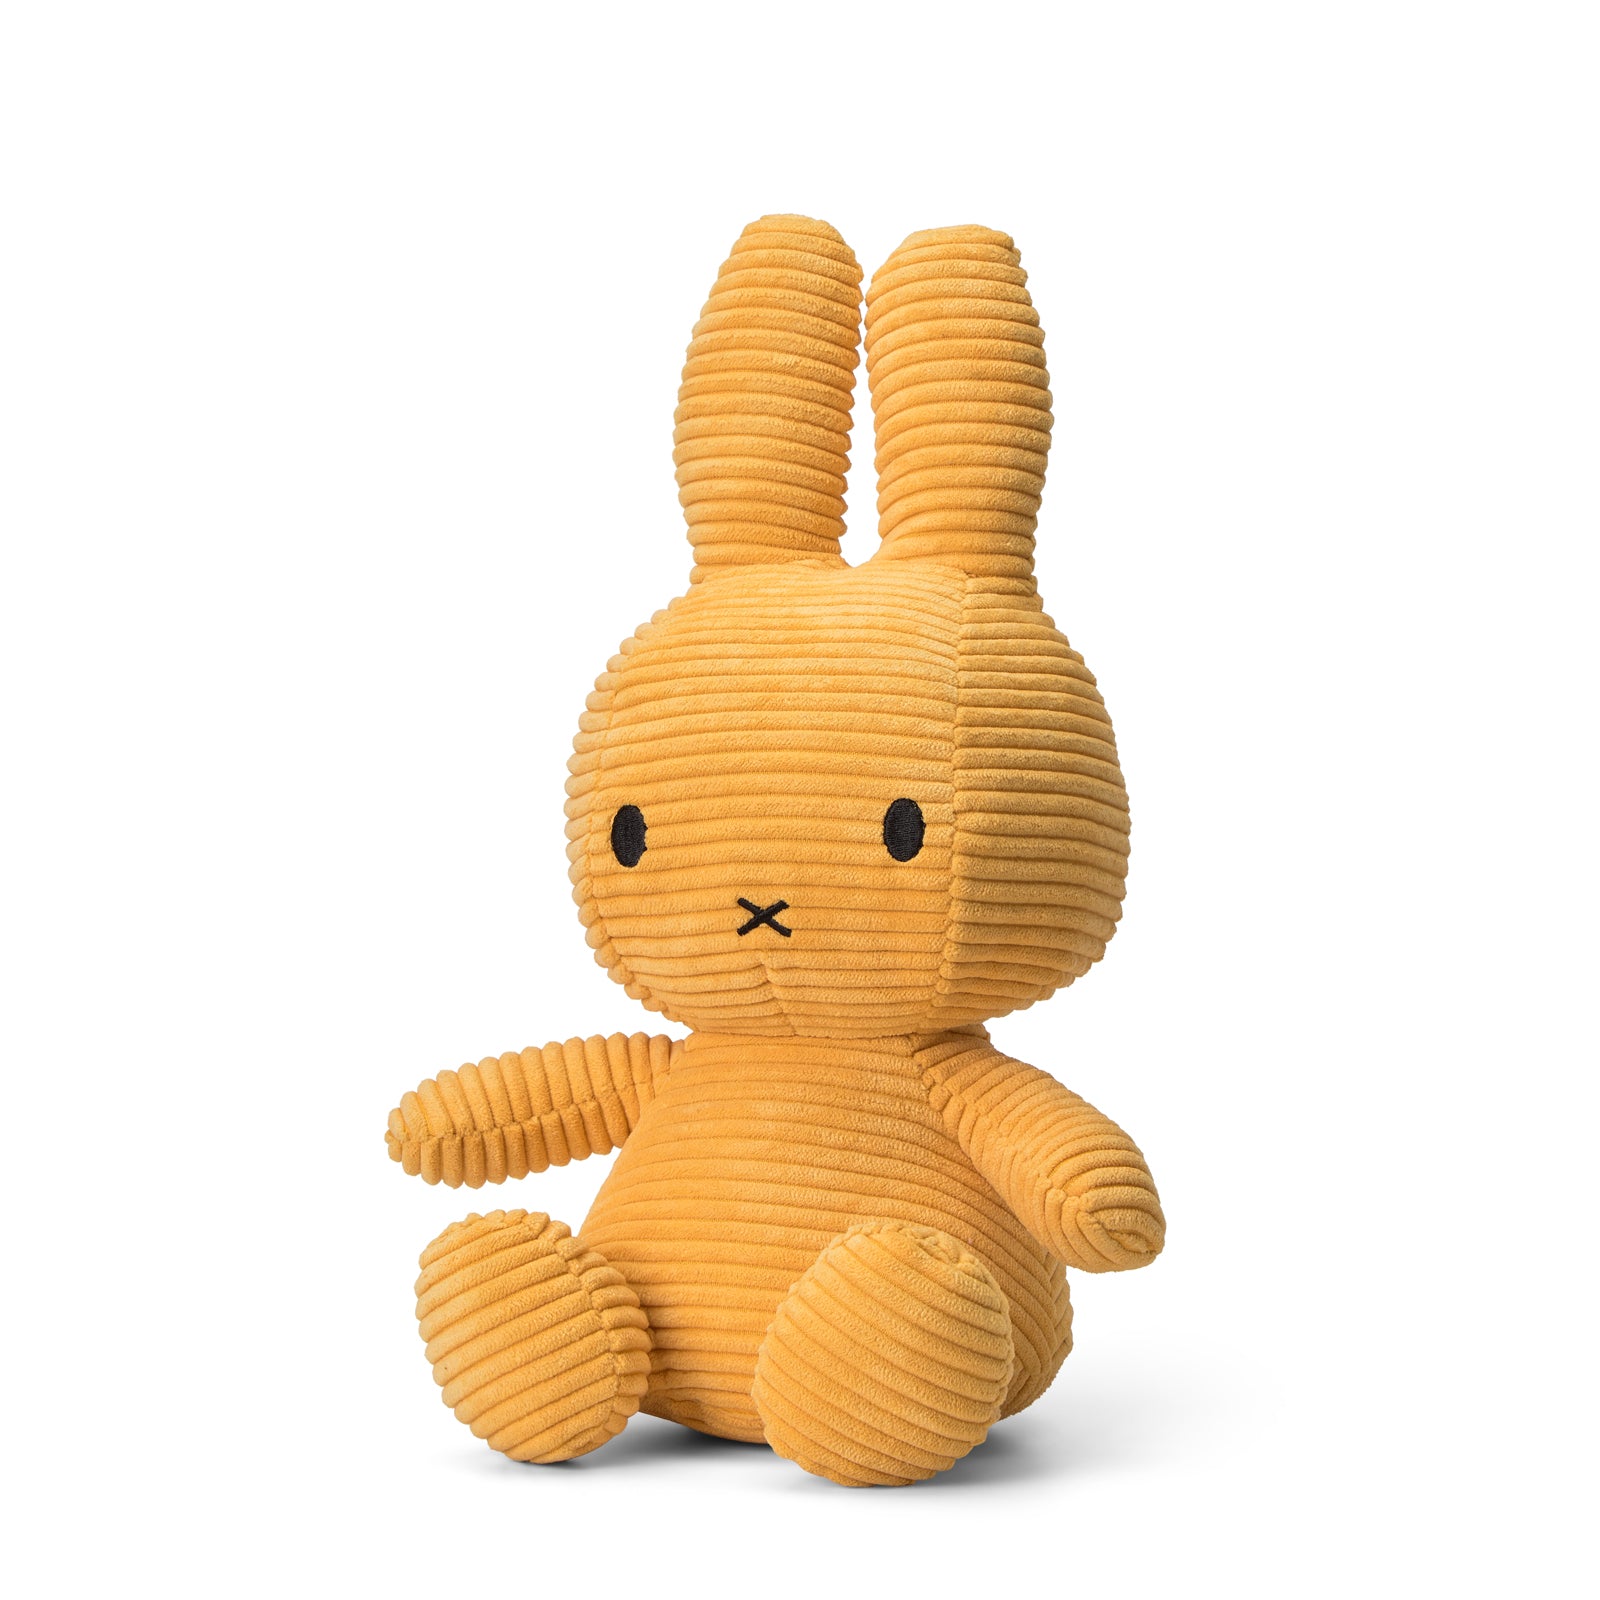 From quarter view of yellow Miffy the rabbit